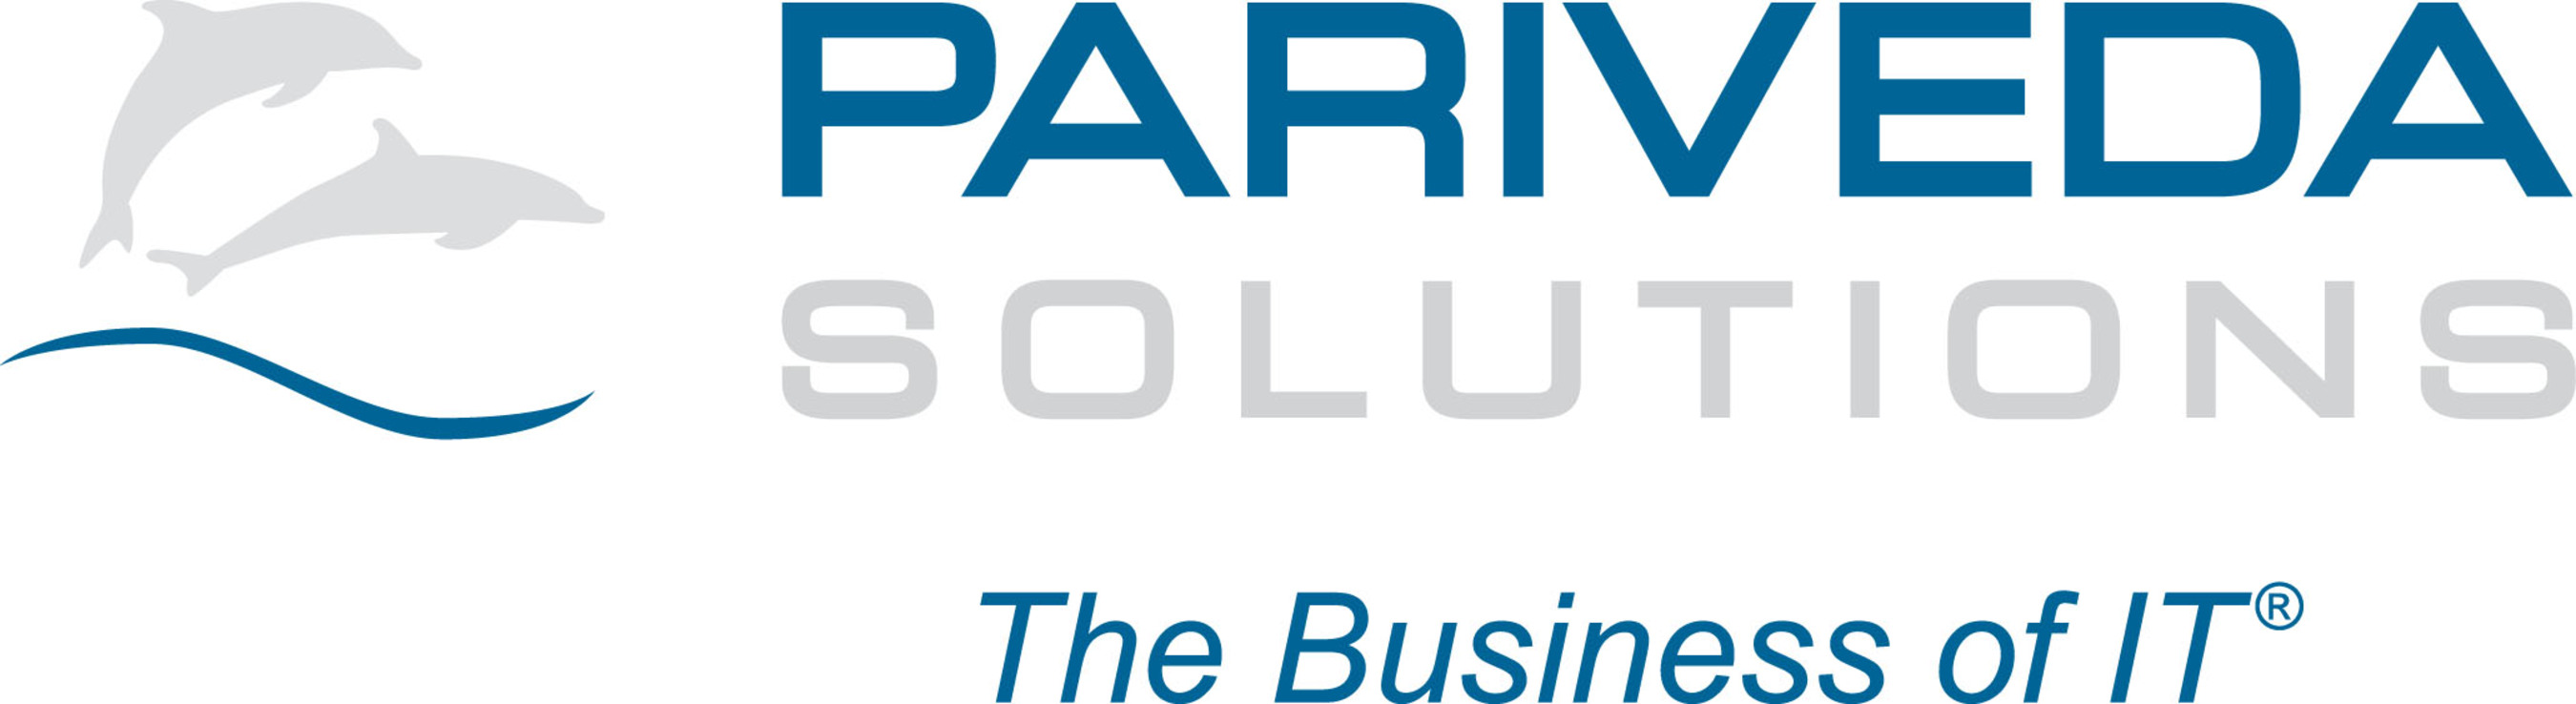 Pariveda Solutions, Inc. is a leading technology consulting firm delivering strategic services and technology solutions. (PRNewsFoto/Pariveda Solutions, Inc.) (PRNewsFoto/)